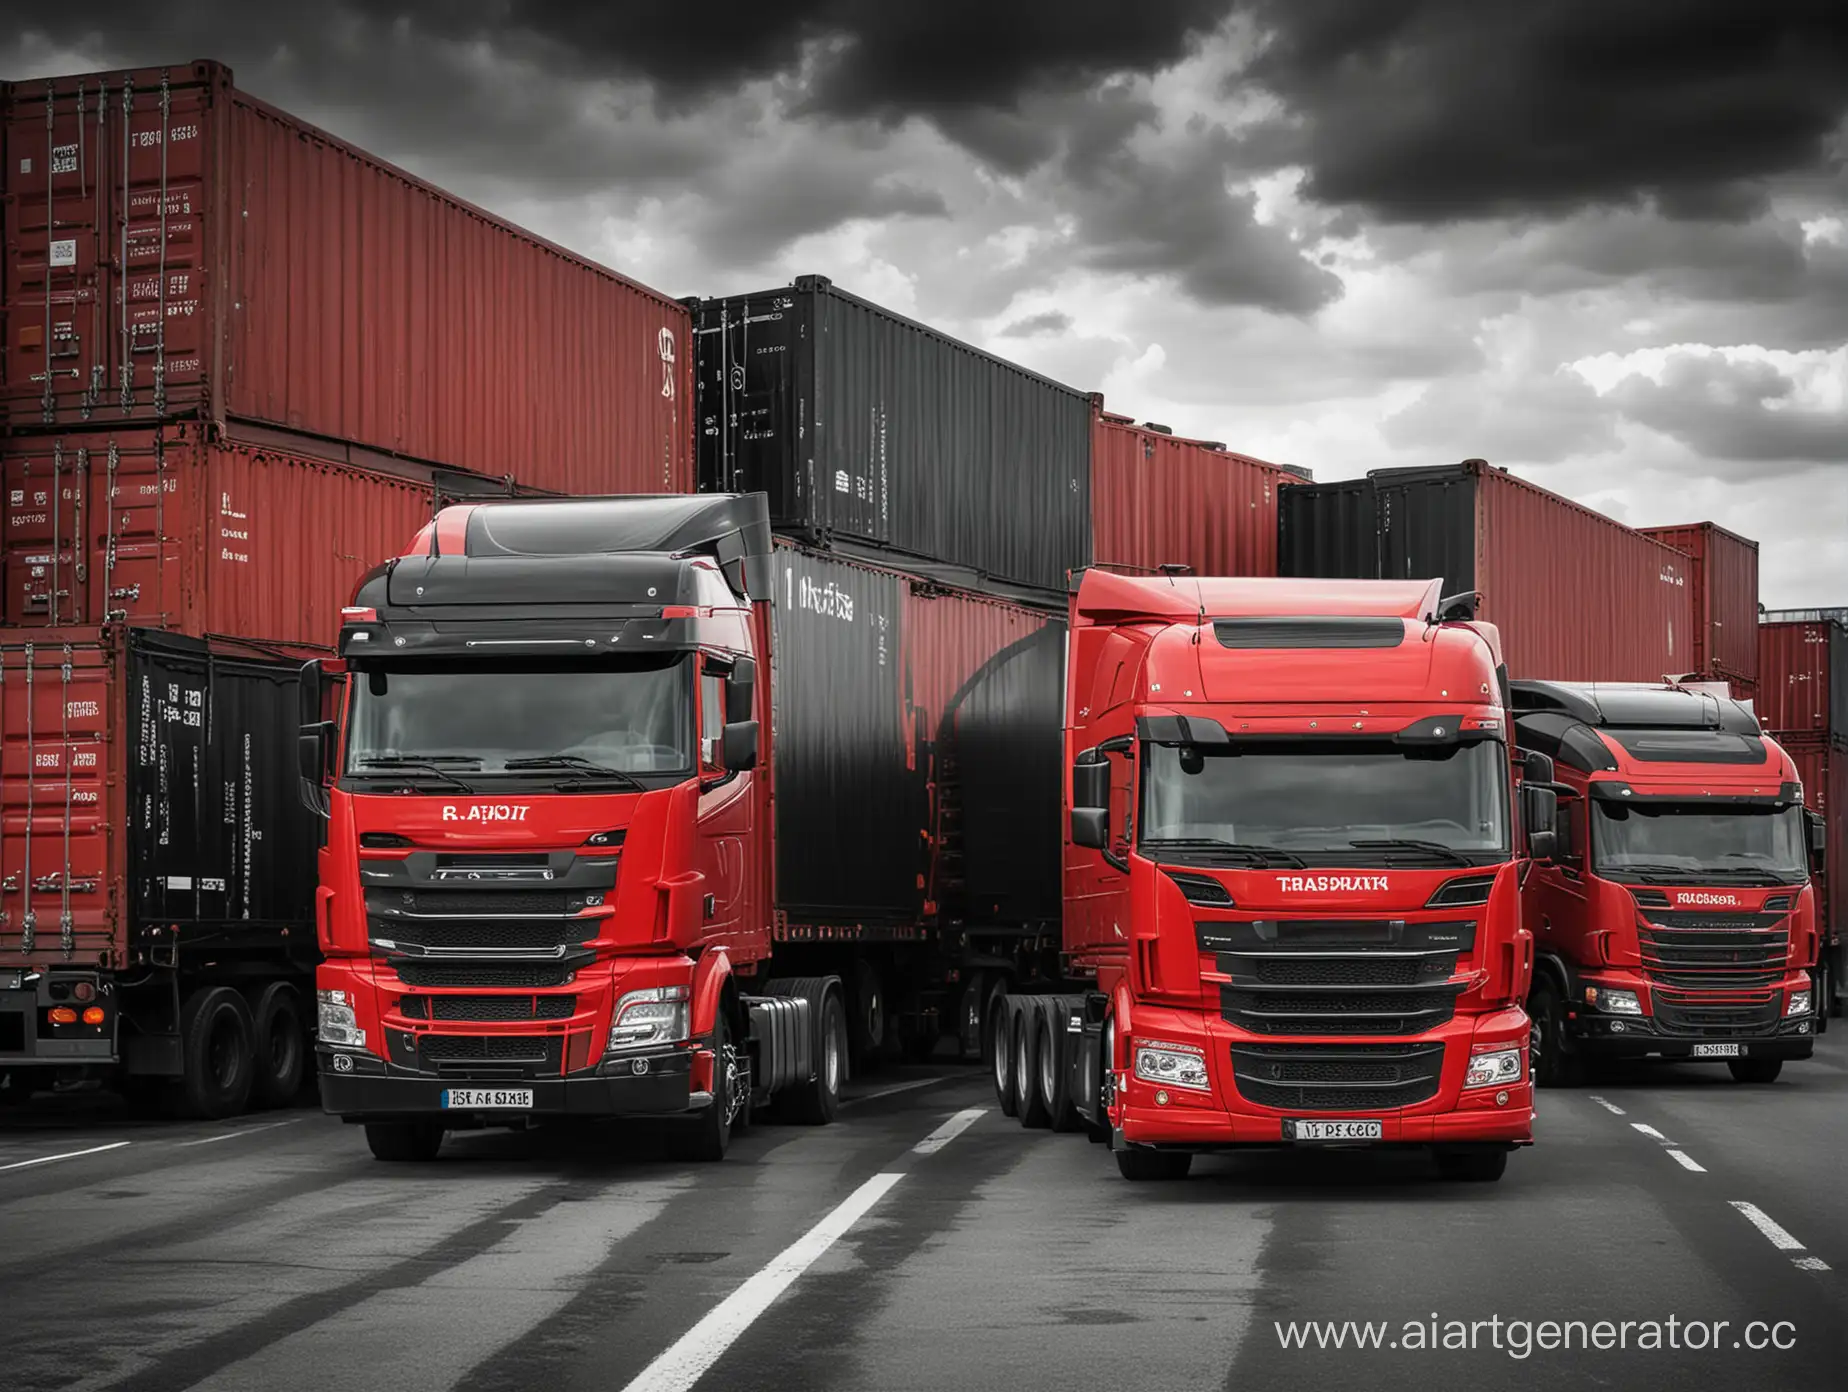 Red-and-Black-Themed-Freight-Transportation-Scene